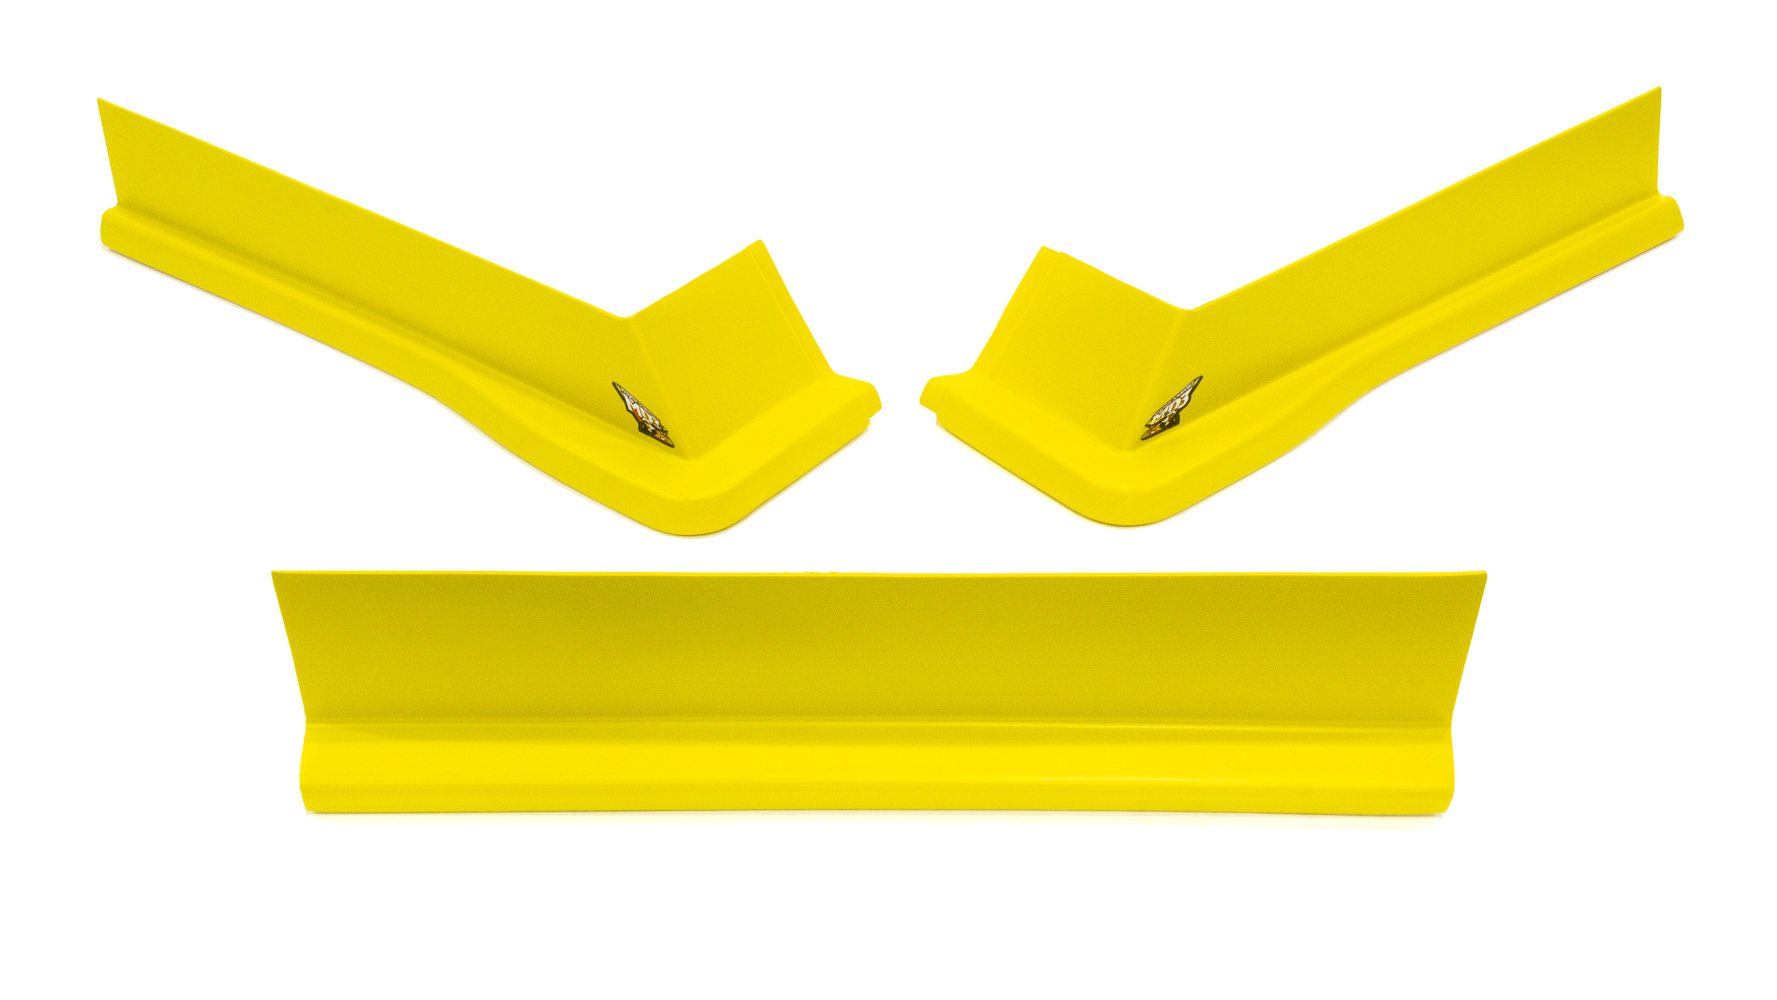 Air Valance - MD3 - 3 Piece - Molded Plastic - Yellow - Modified - Kit